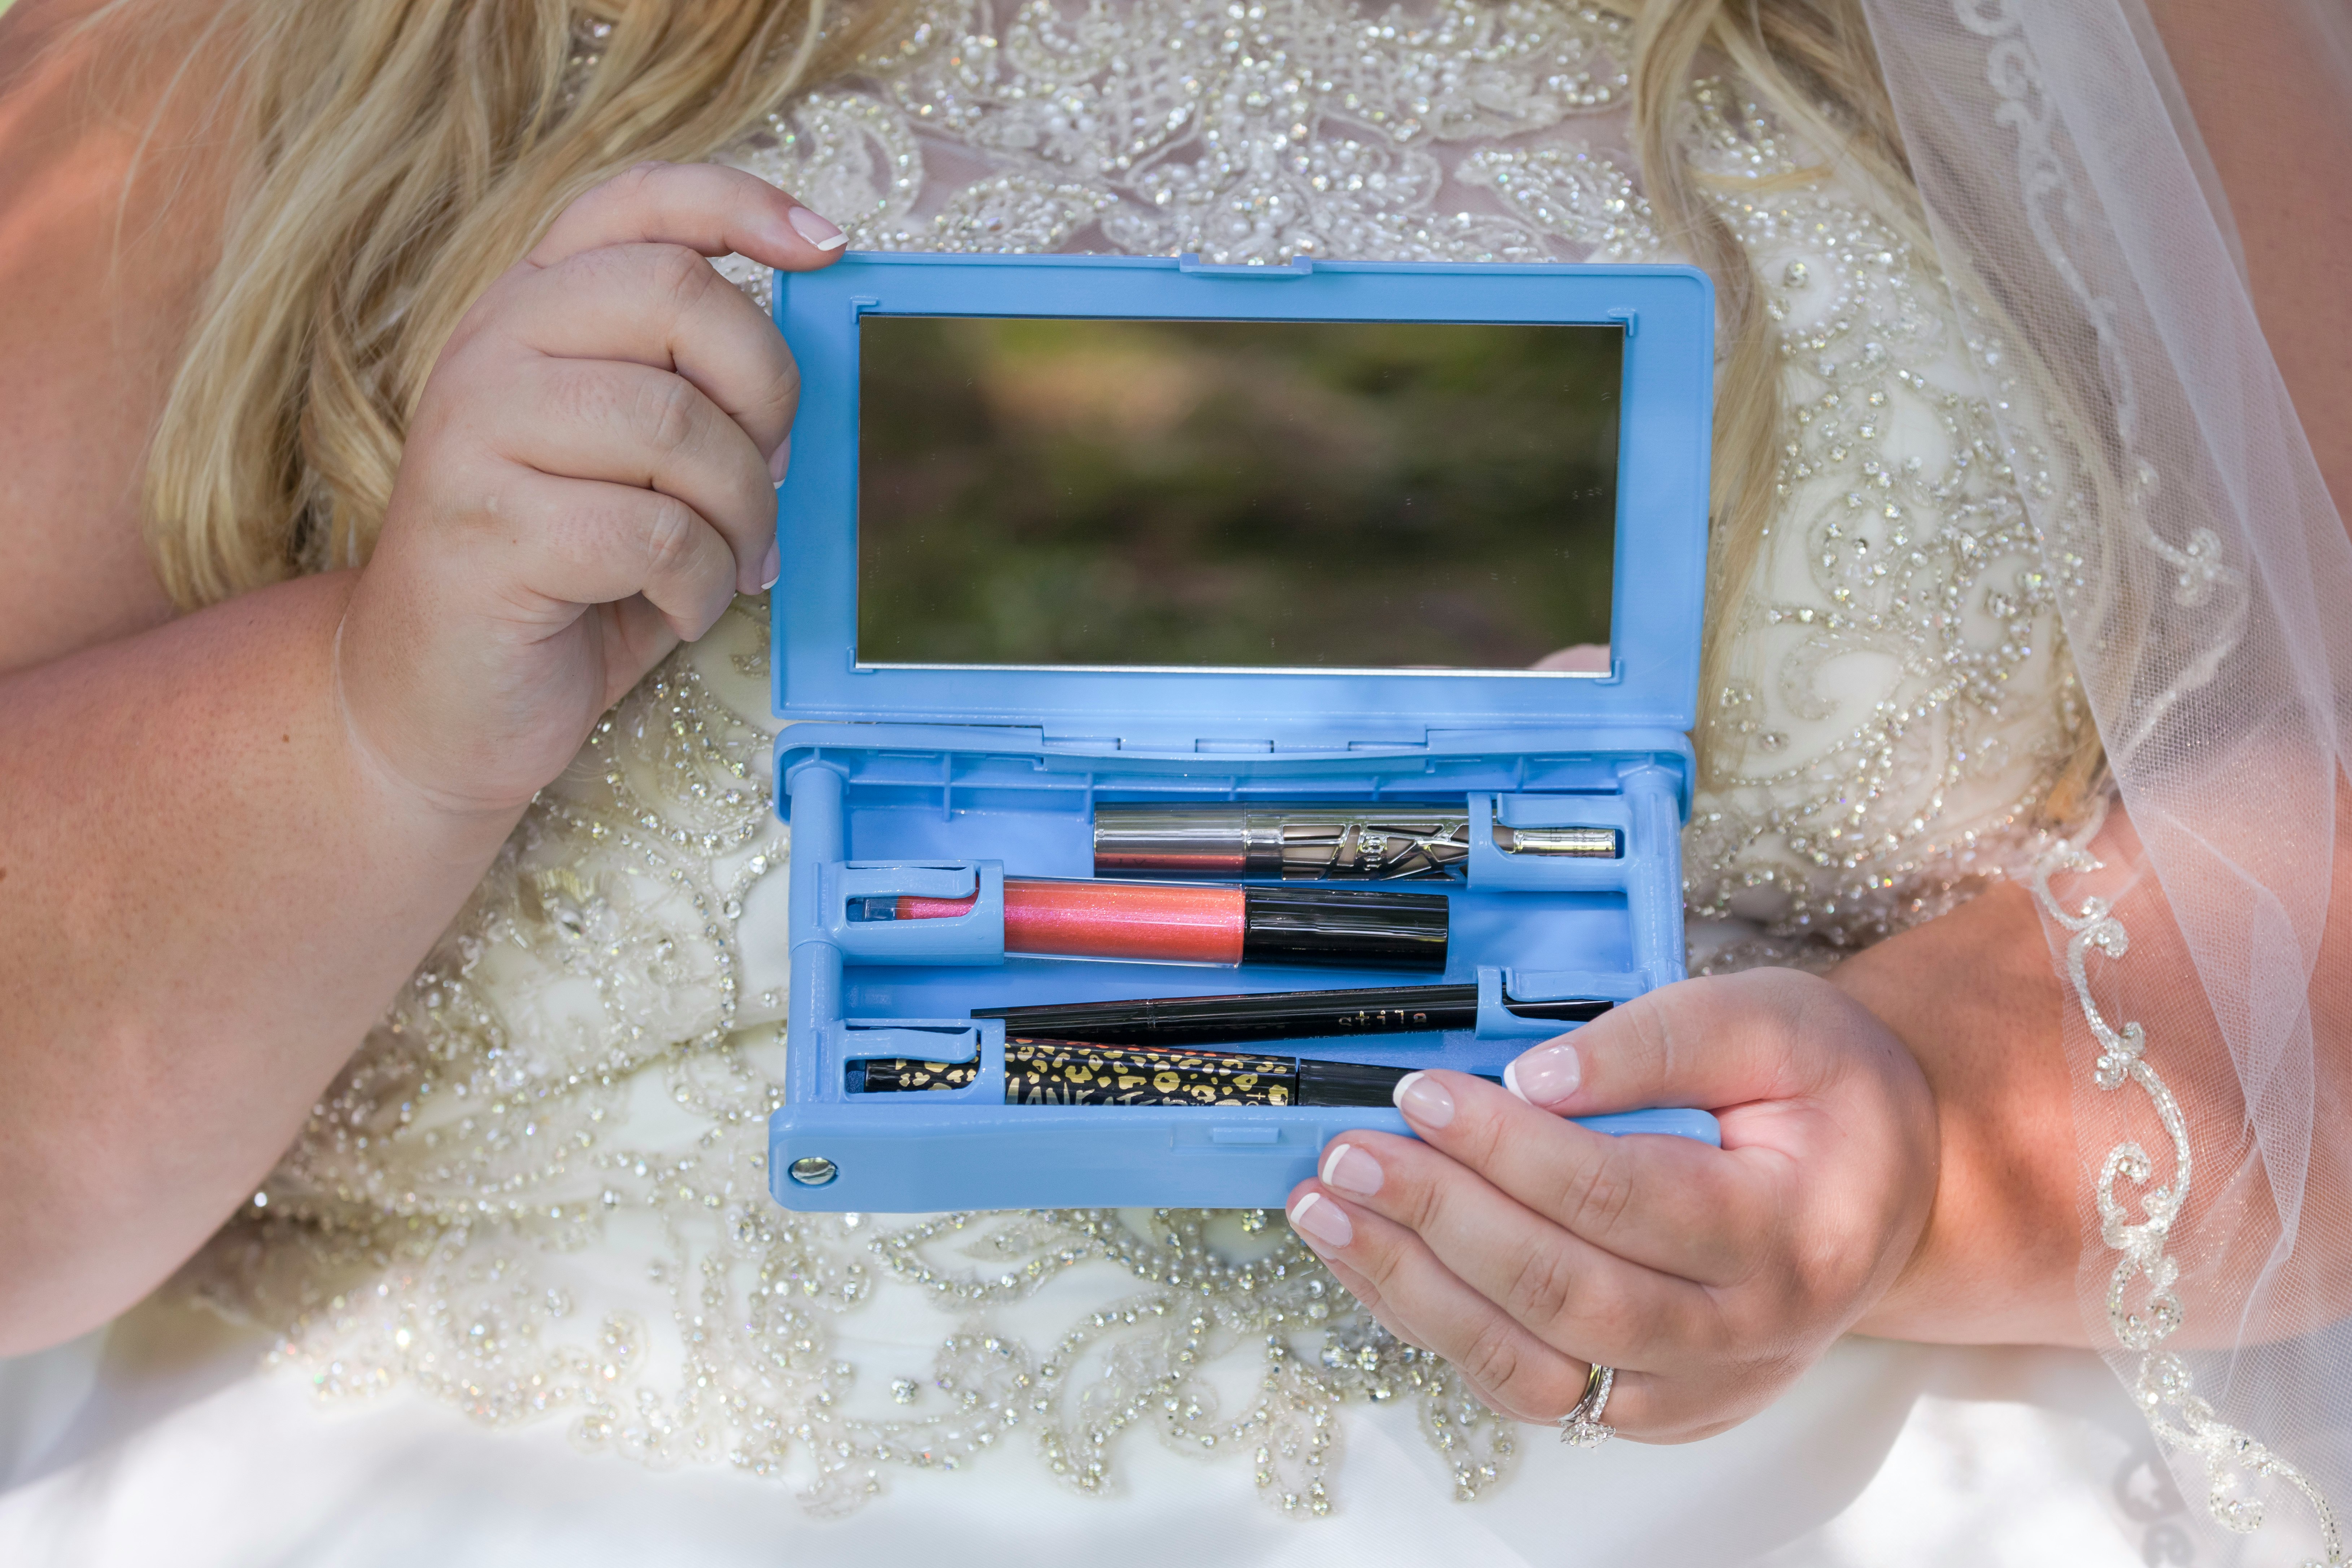 person holding blue and black tablet computer